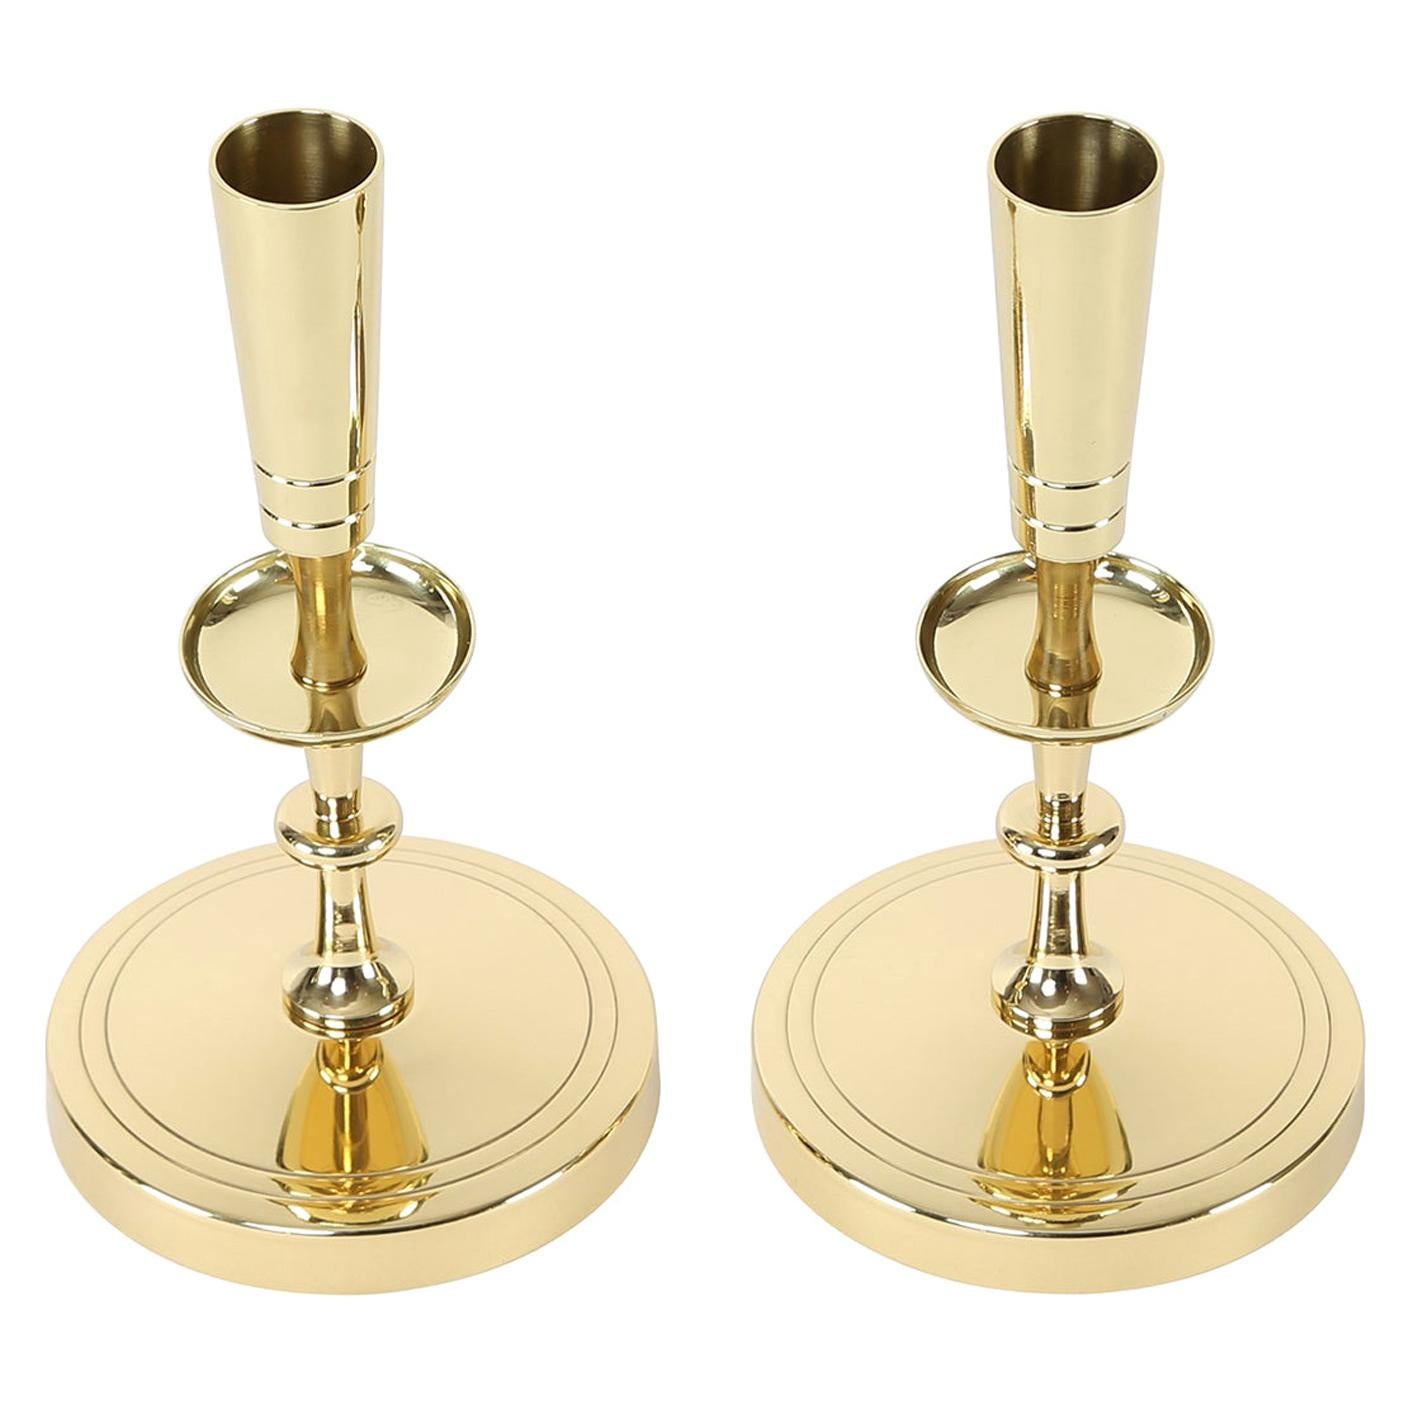 Tommi Parzinger Pair of Candelabra in Polished Brass, 1950s, 'Signed' For Sale